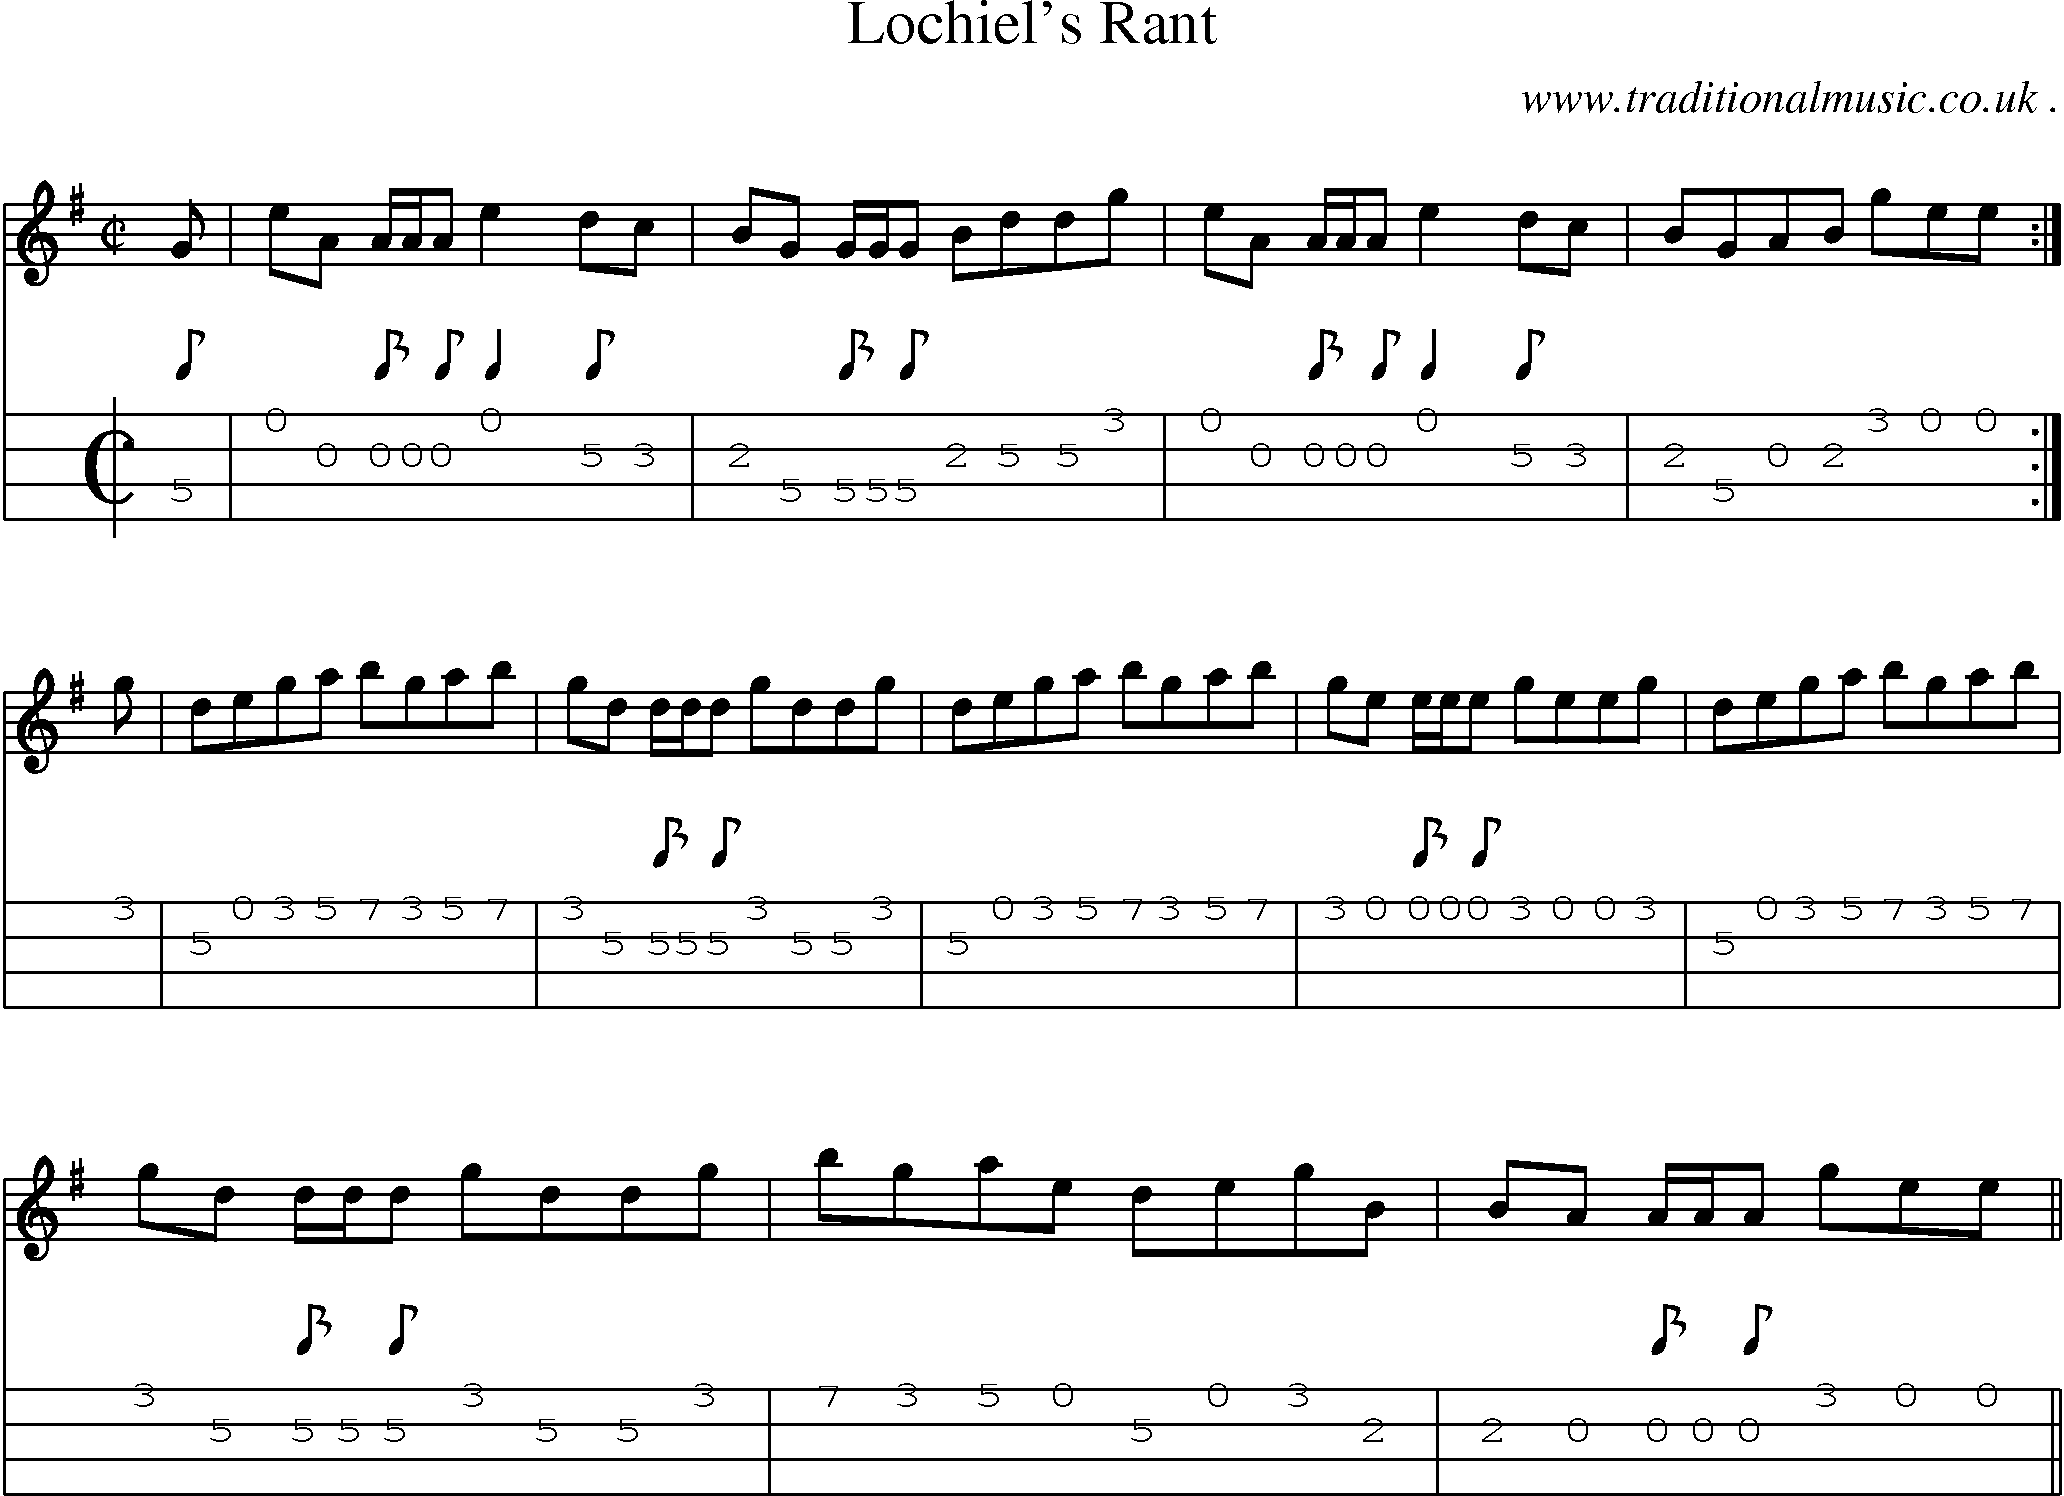 Sheet-music  score, Chords and Mandolin Tabs for Lochiels Rant